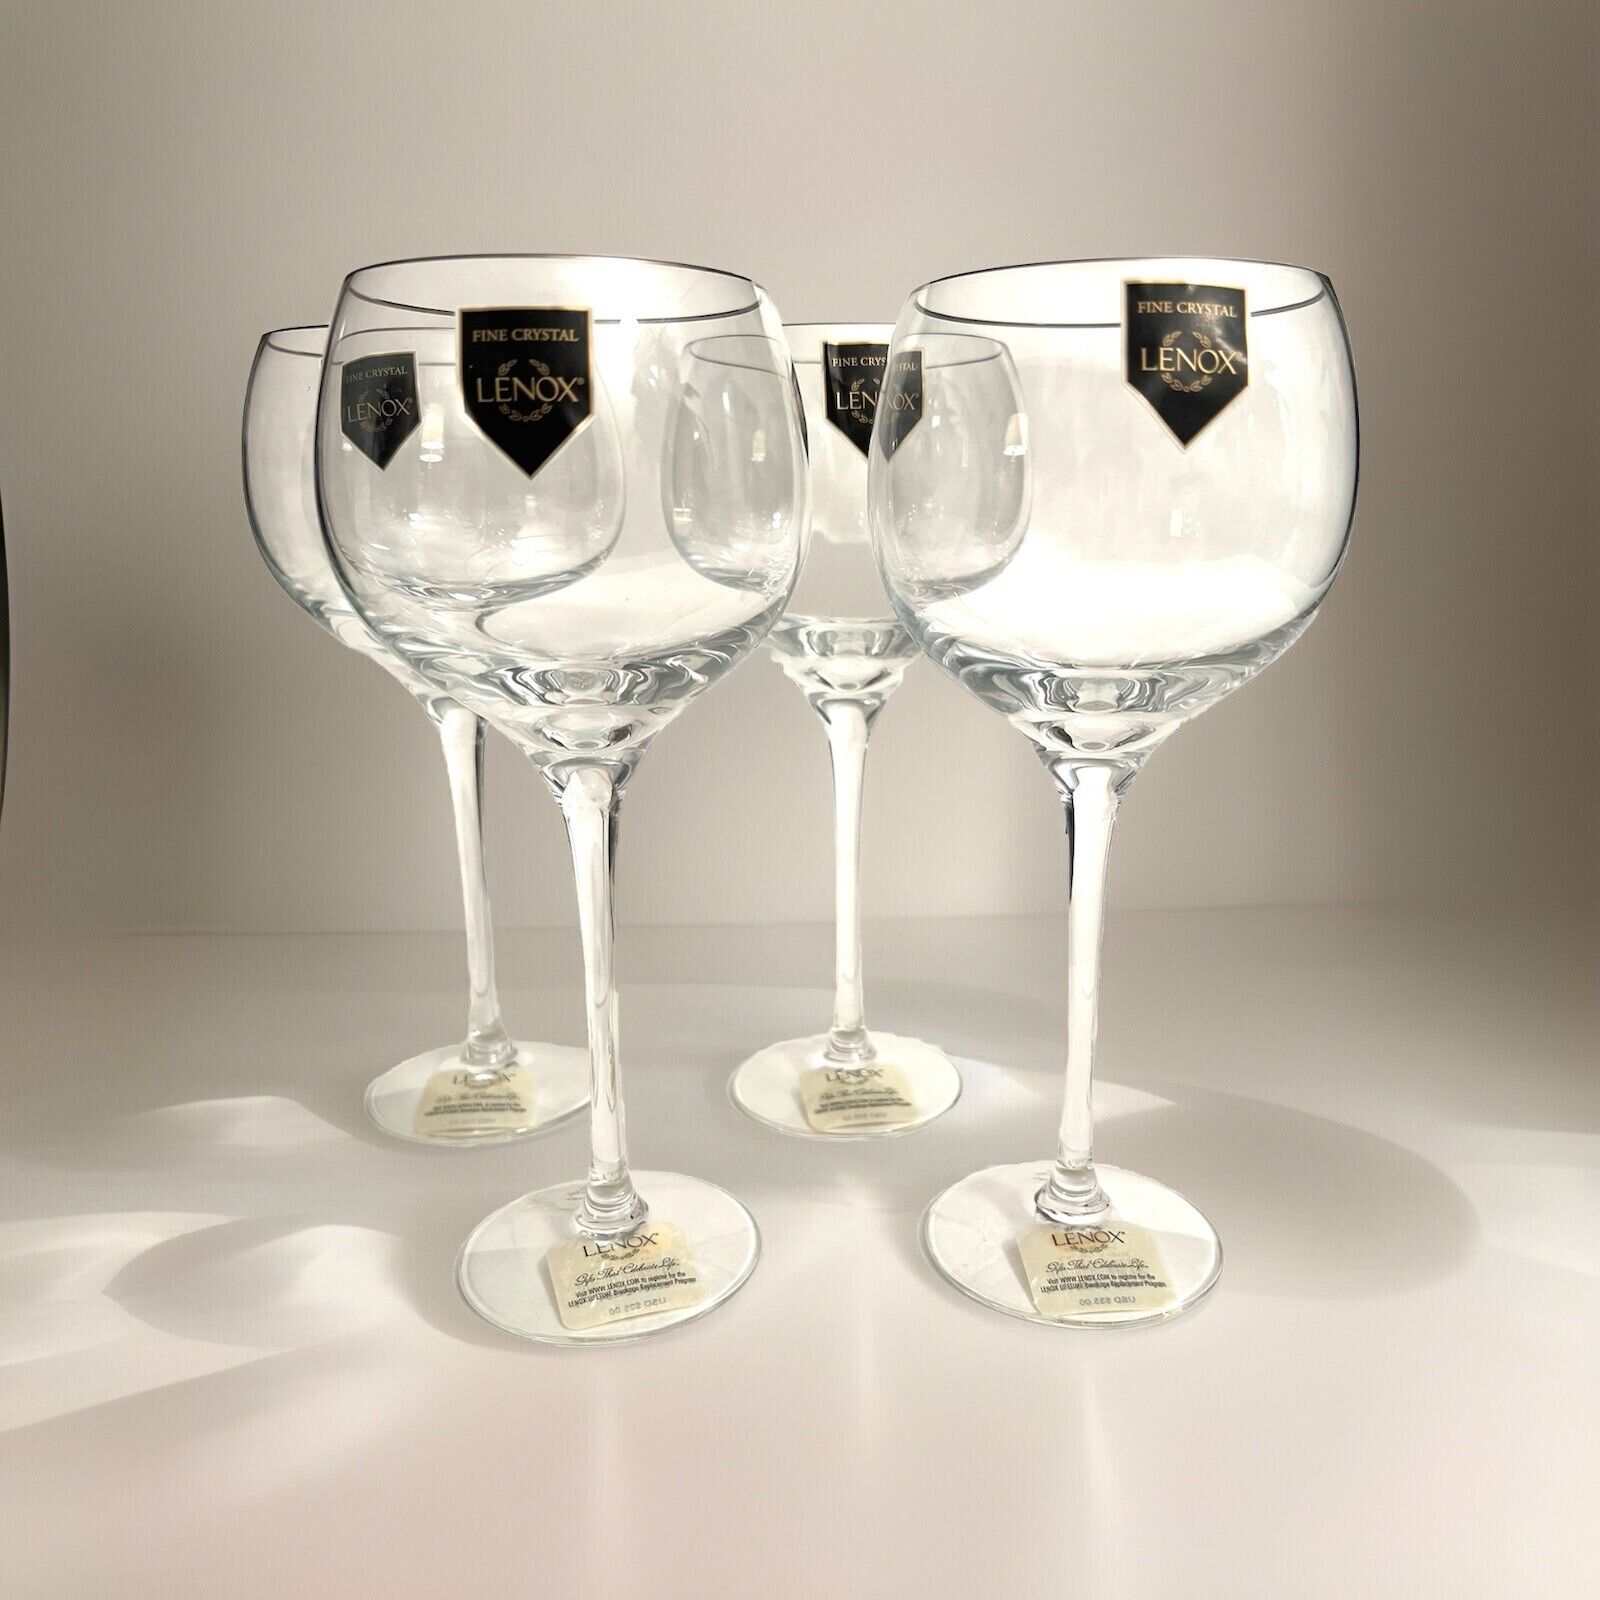 [Set of 4] Lenox Lead Crystal Solitaire Platinum Balloon Wine Beer Glasses New